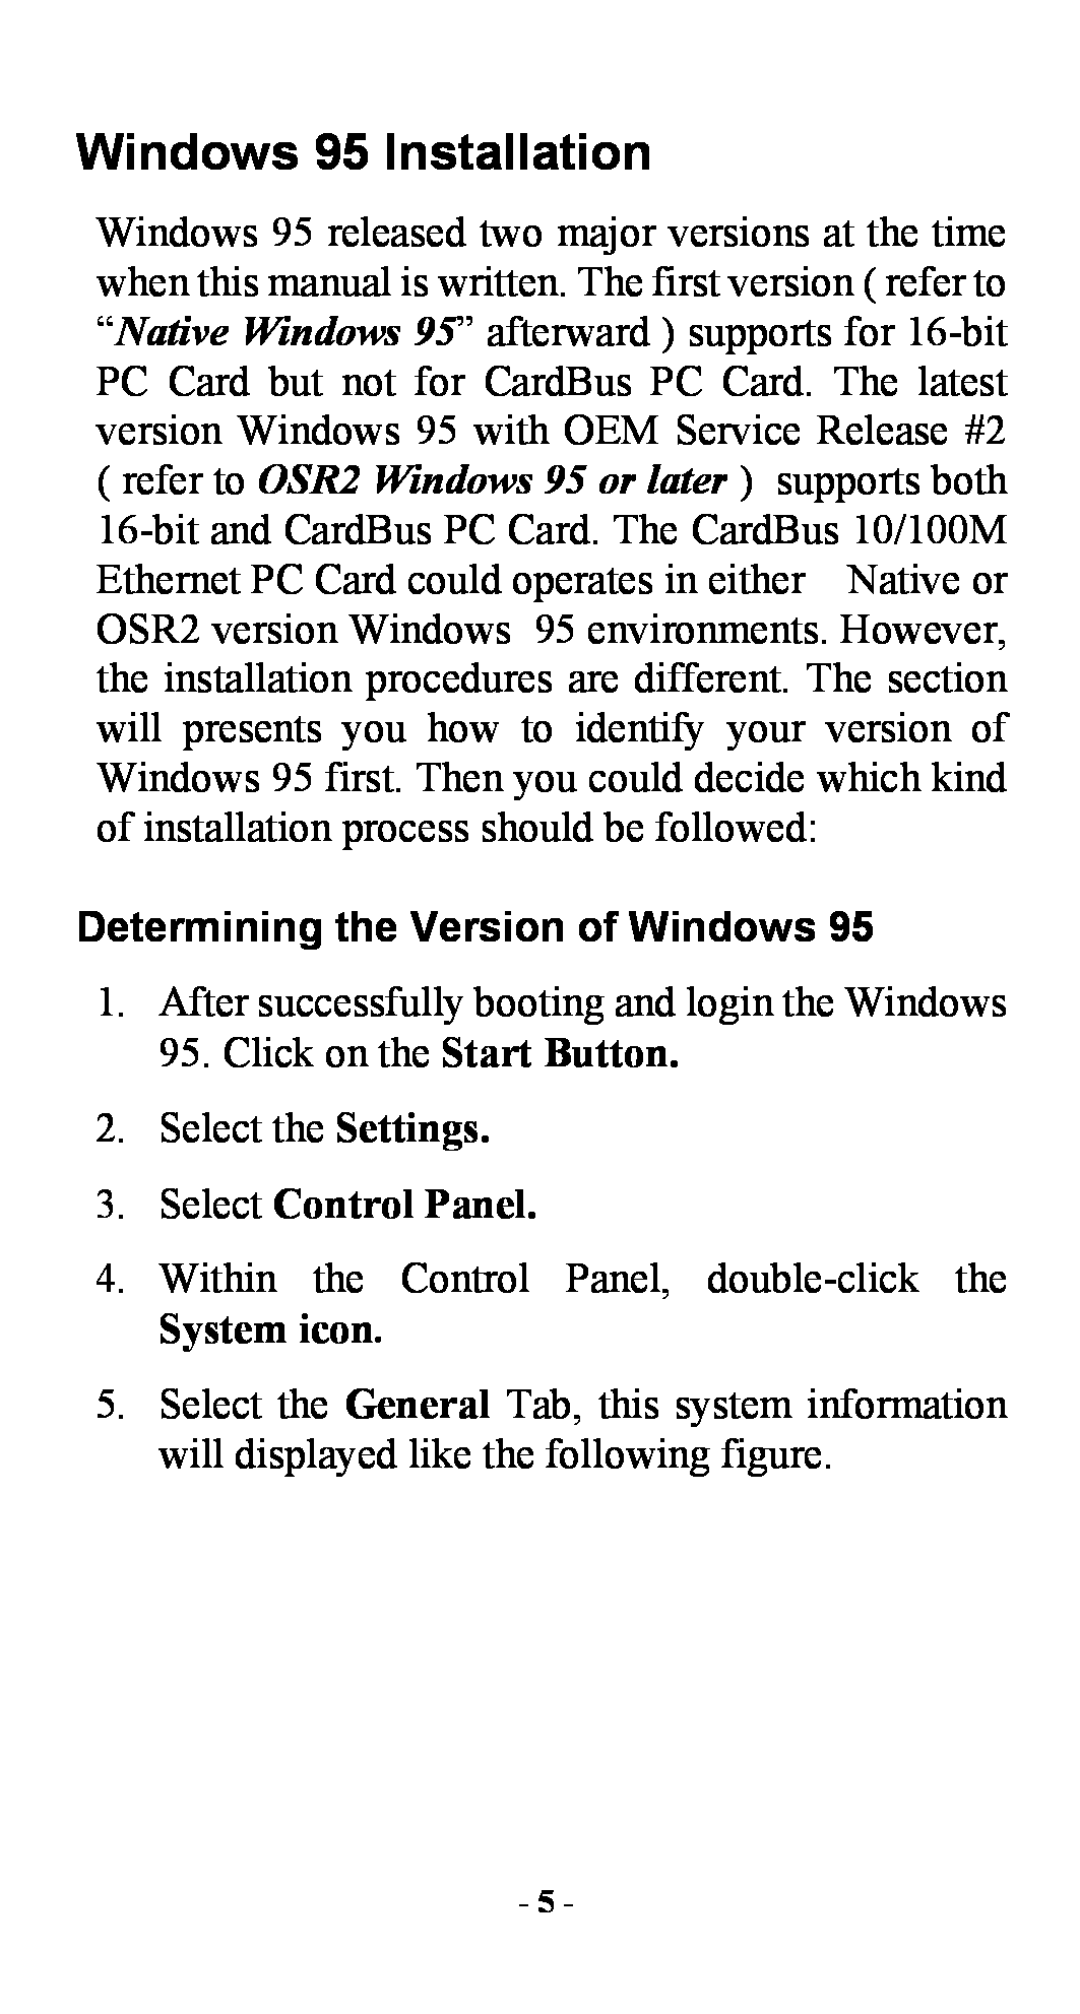 Abocom FE2000 manual Windows 95 Installation, Determining the Version of Windows, Select Control Panel, System icon 